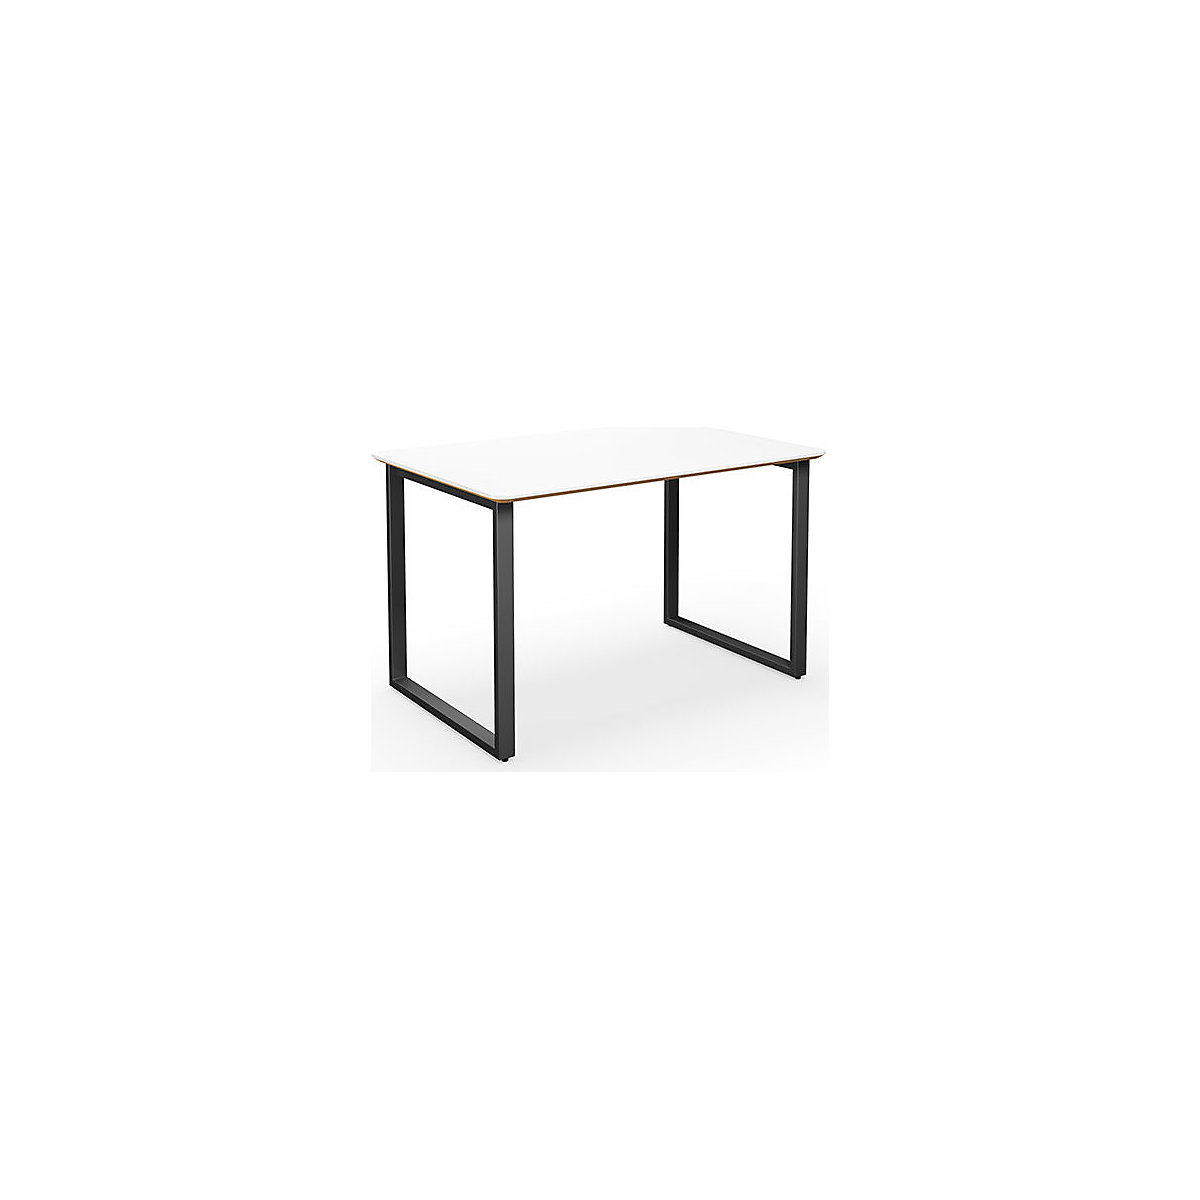 DUO-O Trend multi-purpose desk, straight tabletop, rounded corners, WxD 1200 x 800 mm, white, black-5